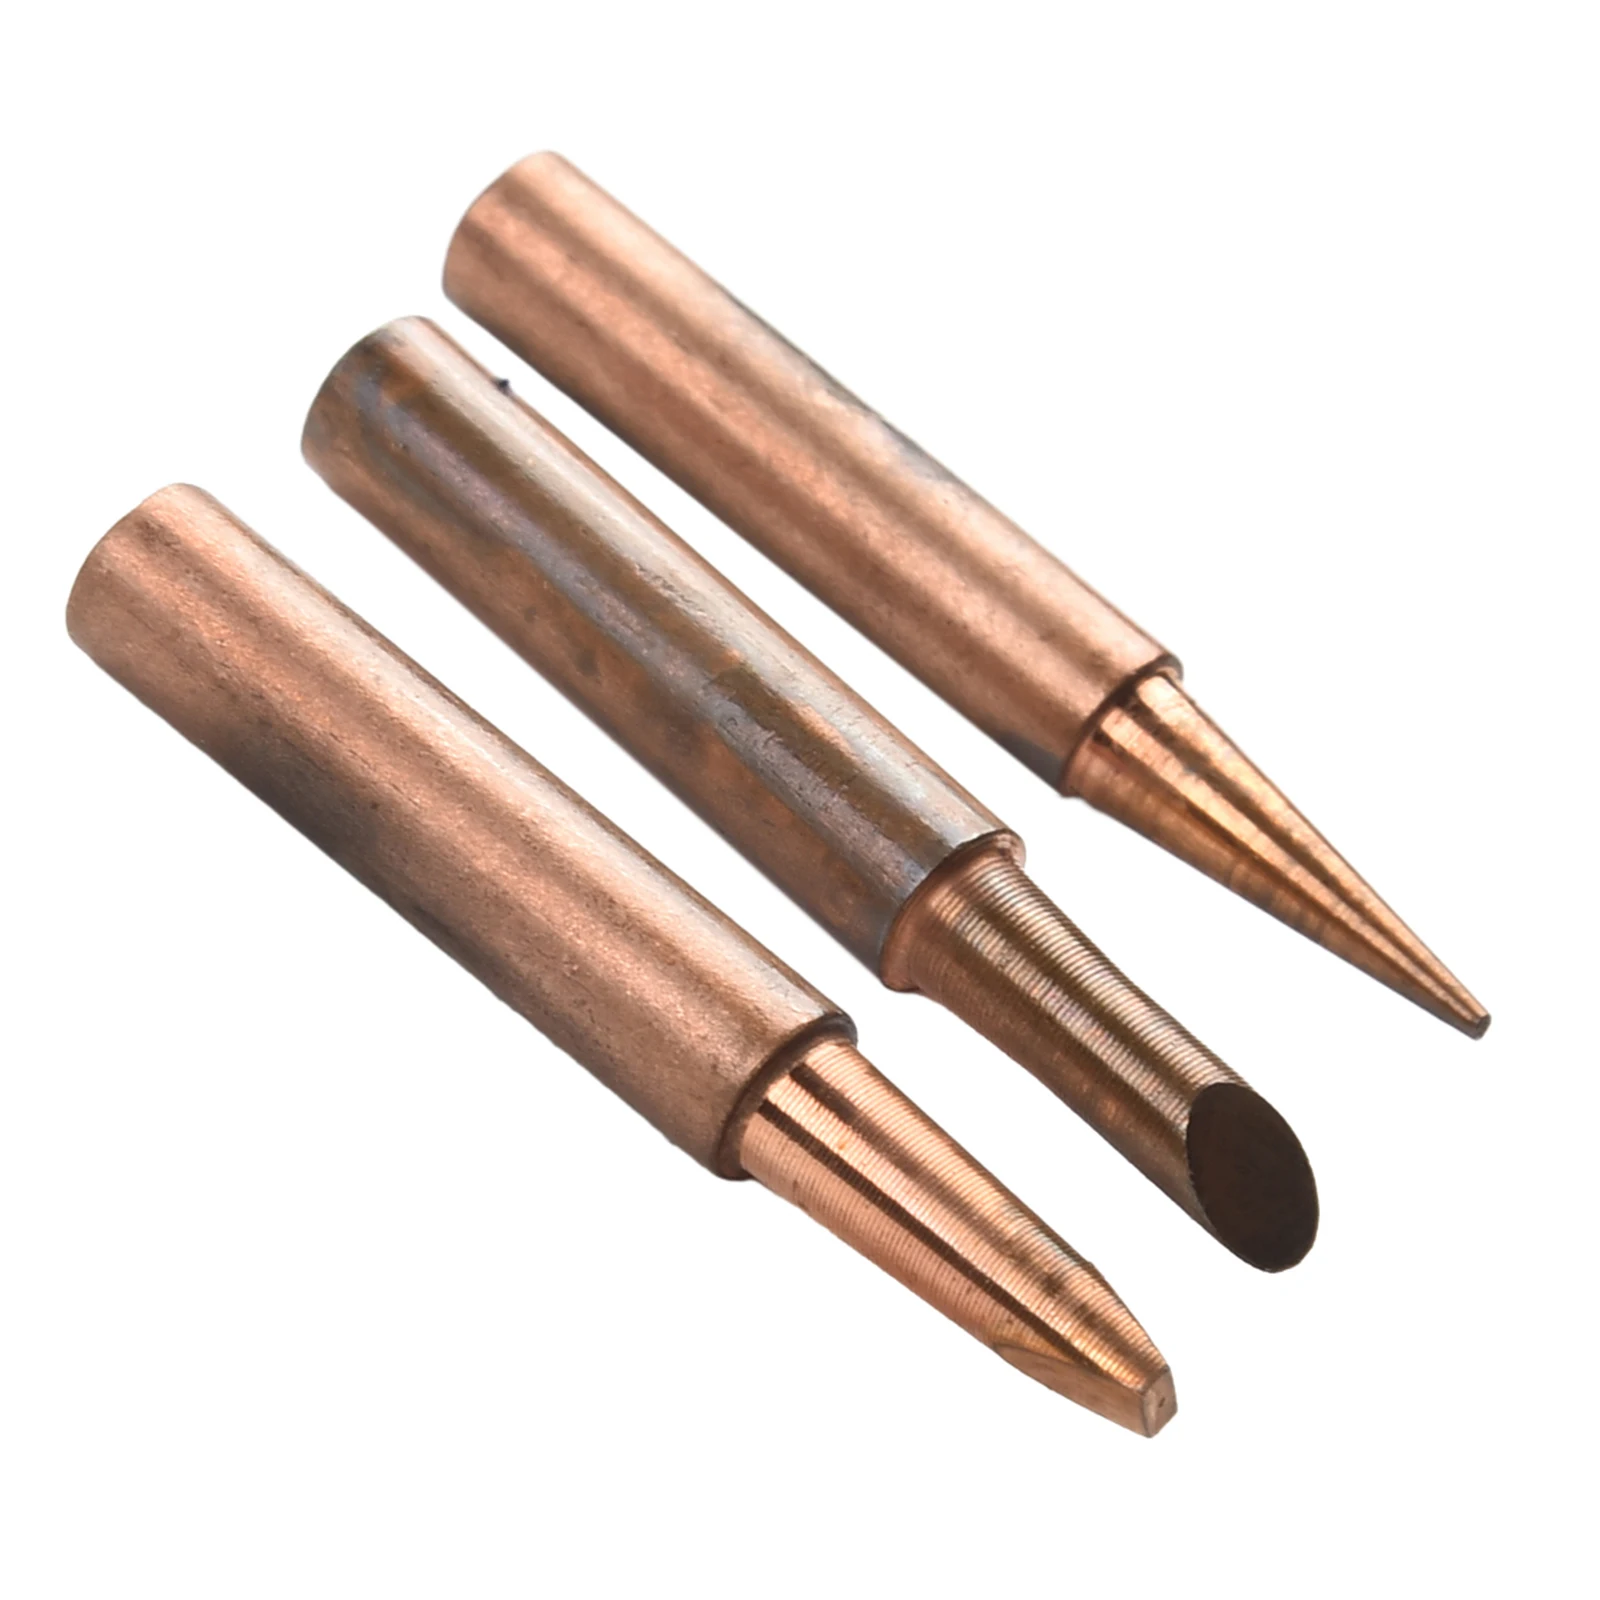 

Accessories Soldering Tip 200°~480° Diamagnetic Head Lead-free Pure Series Solder Tool 10pc/Set 900M-T Copper Electric